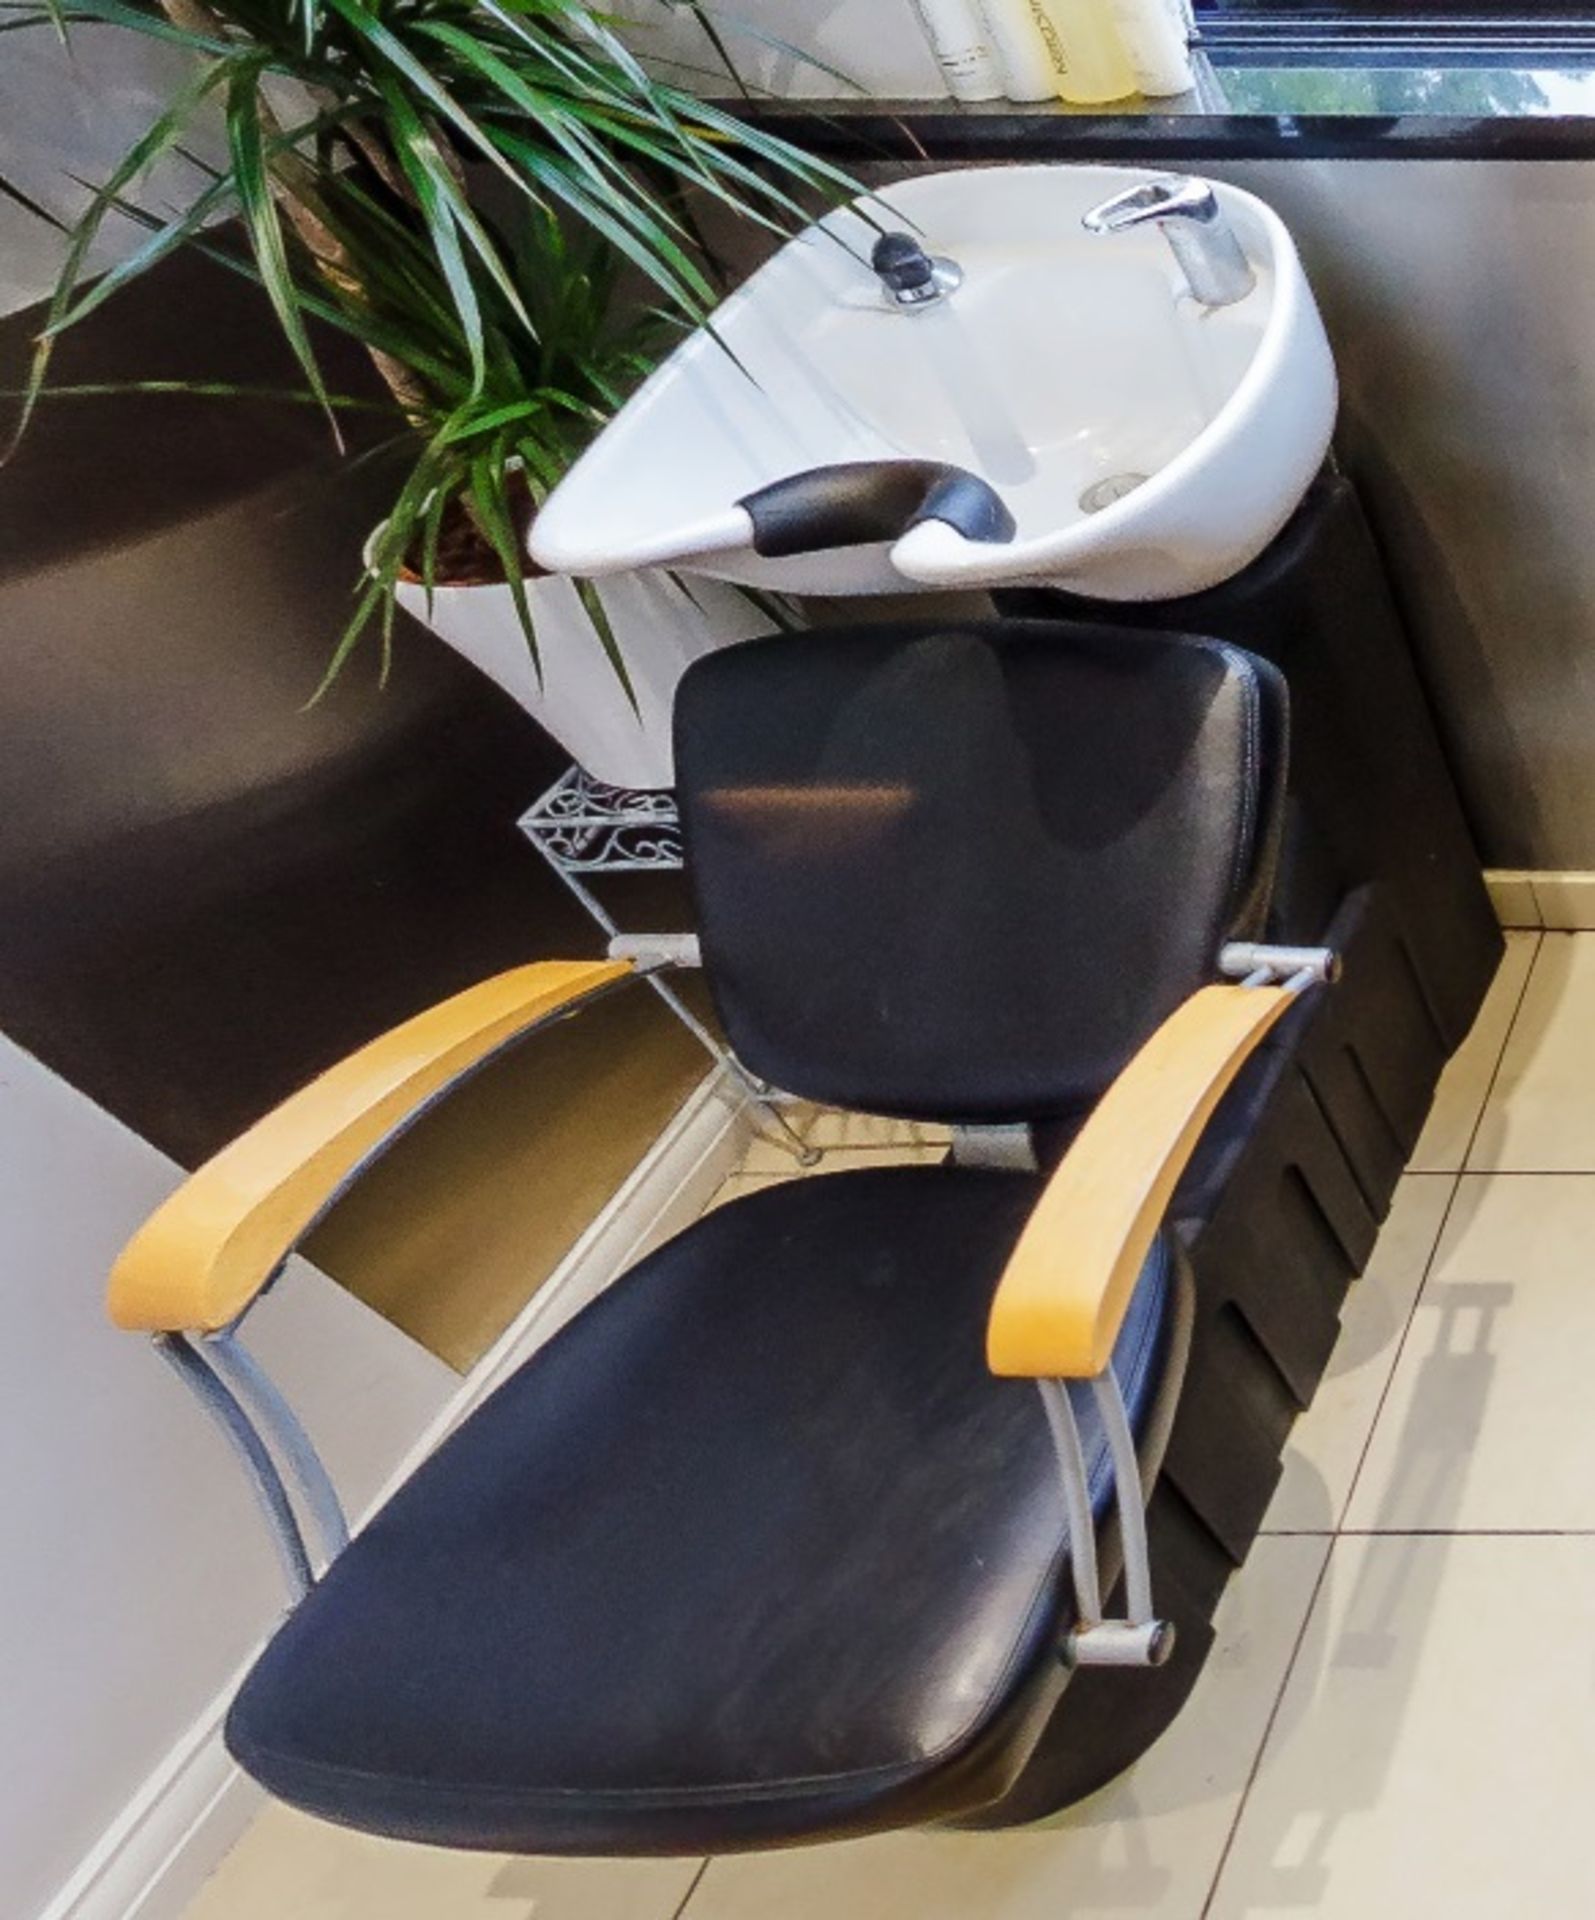 1 x Hair Washing Backwash Shampoo Basin Chair - Recently Removed From A Boutique Hair Salon - Ref: